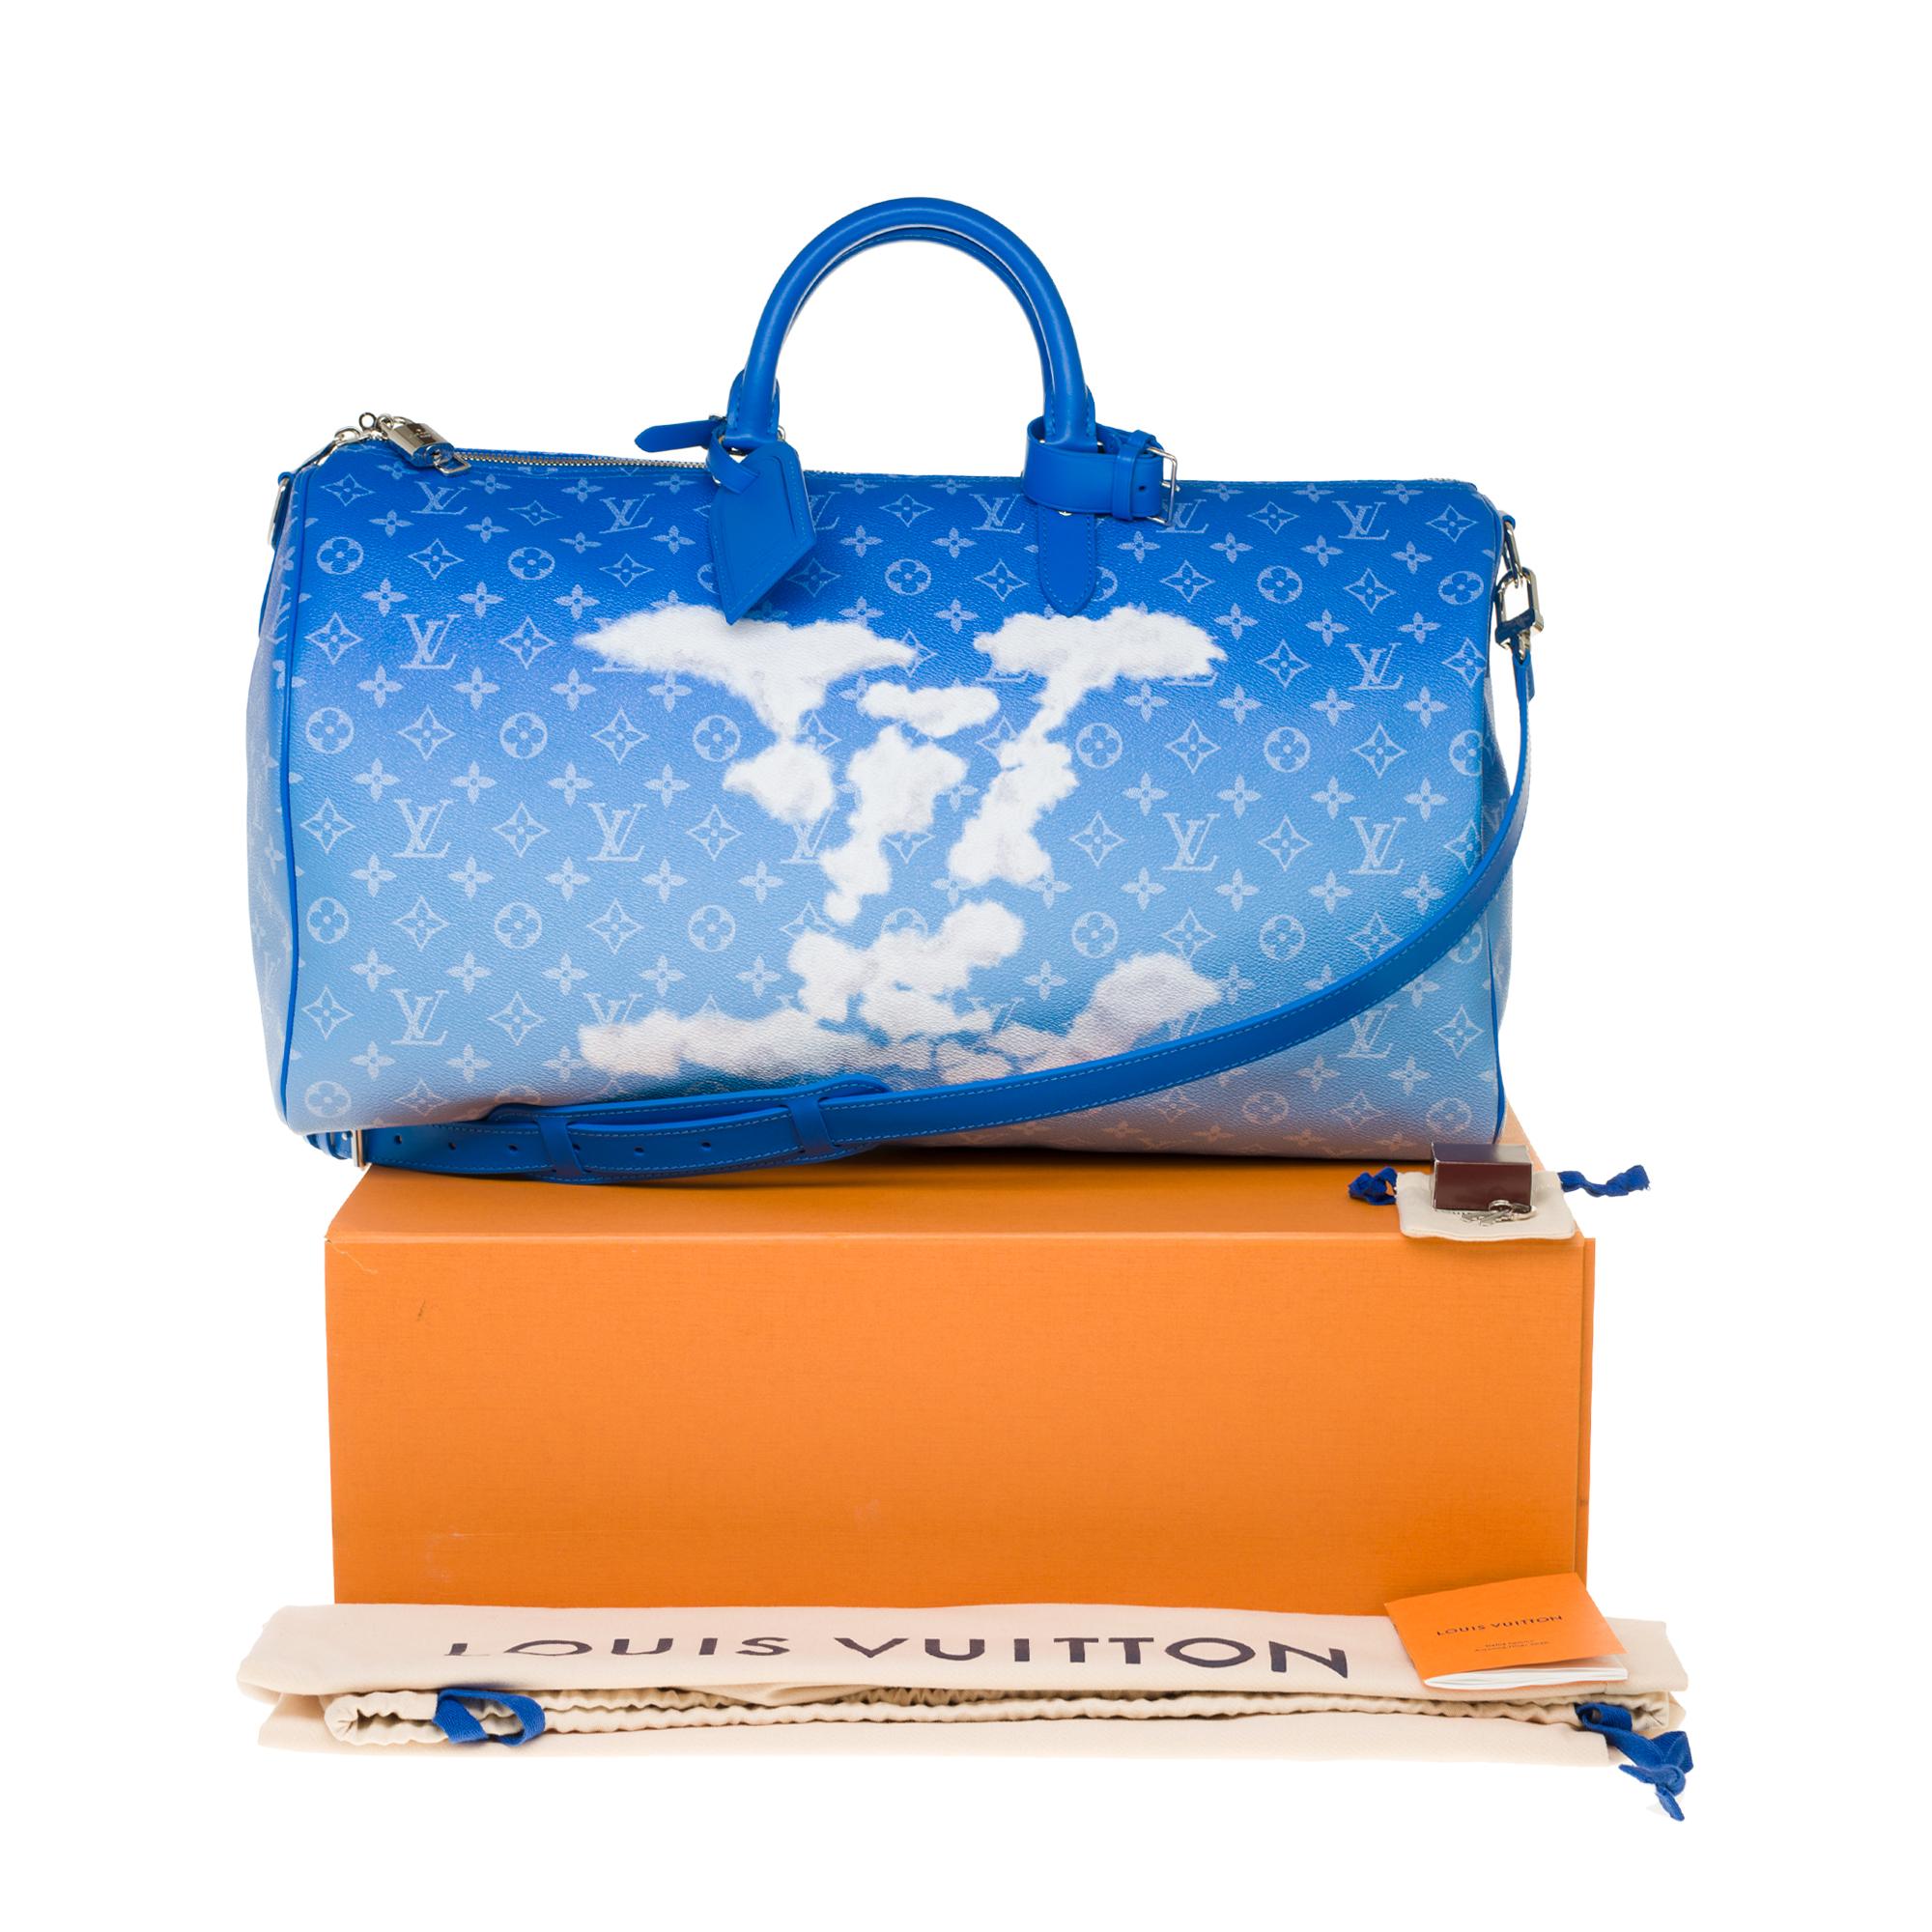 Found these goodies from the LV Virgil Monogram Cloud from the